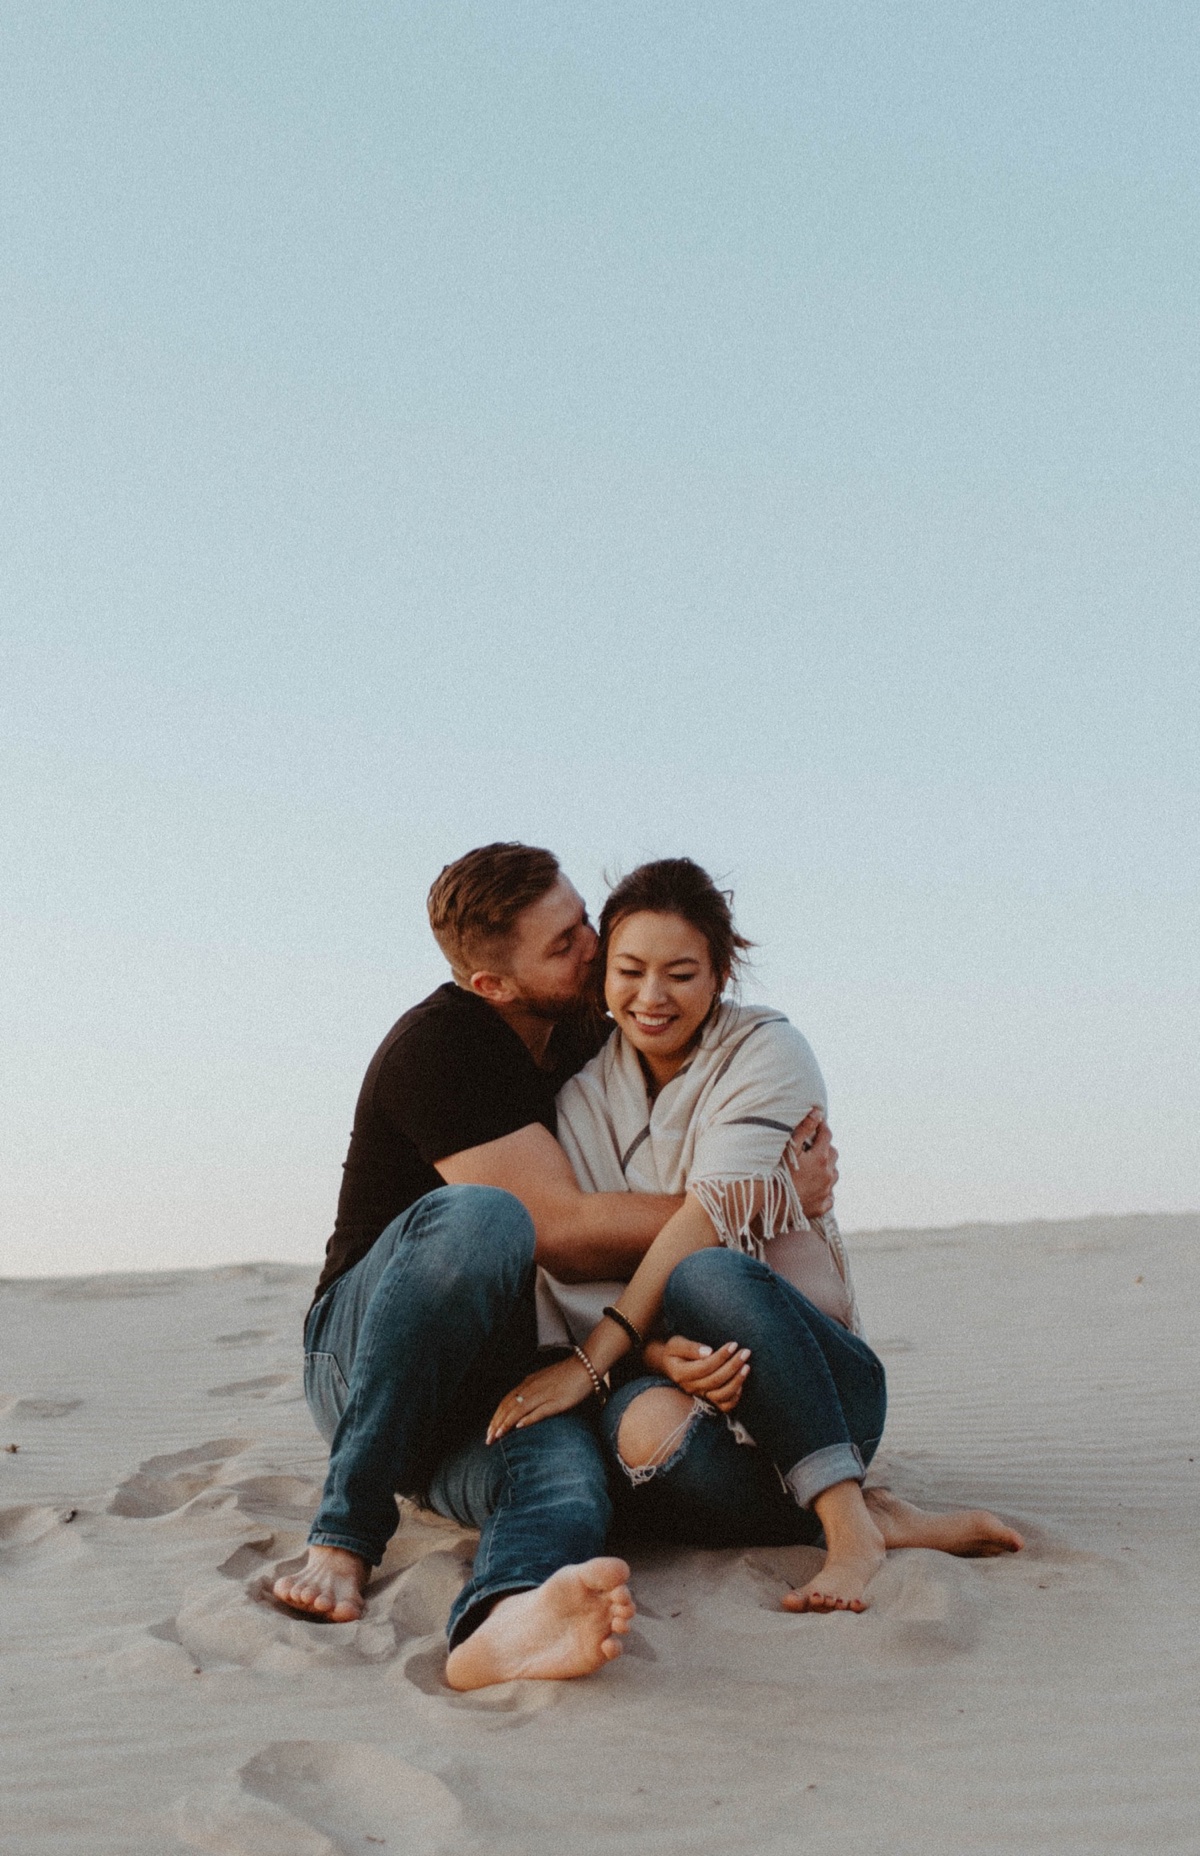 Couple sitting in sand dunes